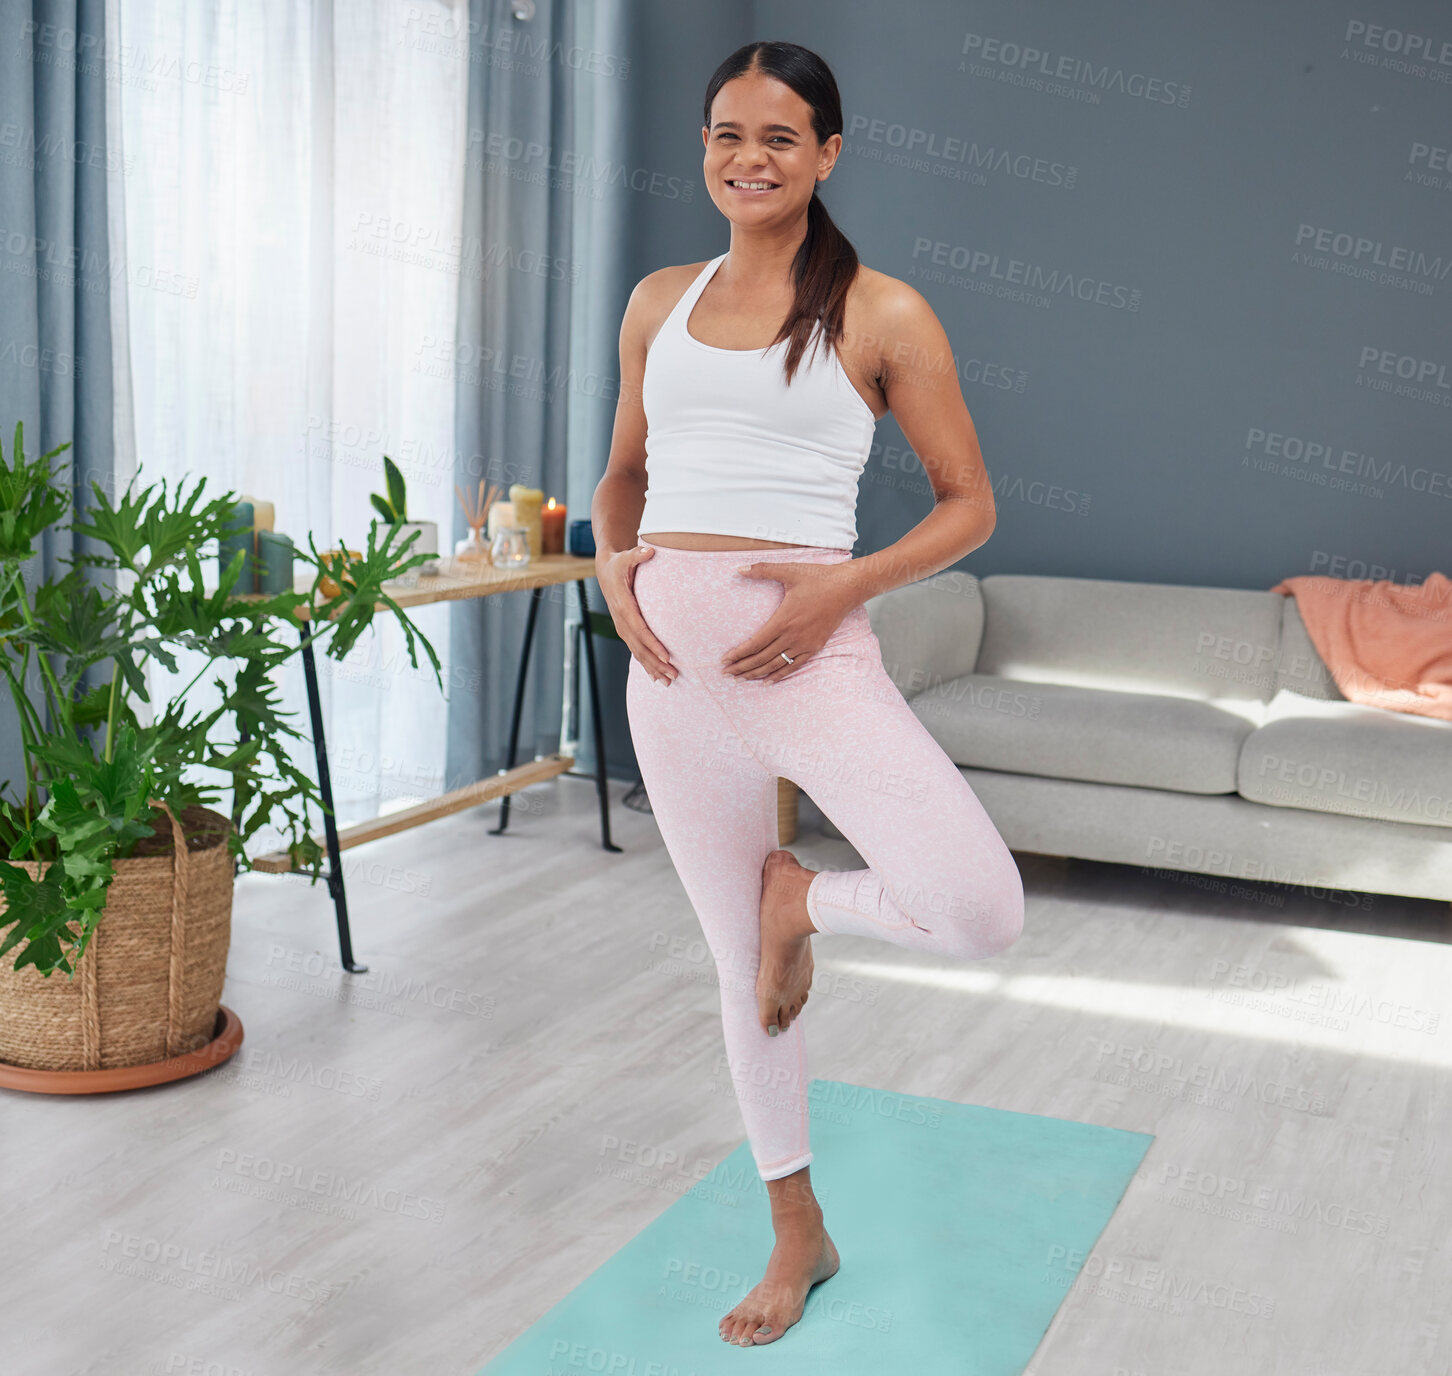 Buy stock photo Portrait, yoga or pregnant woman with balance in exercise or fitness workout in house living room. Pregnancy, wellness or healthy person with a happy smile in maternity training body for flexibility